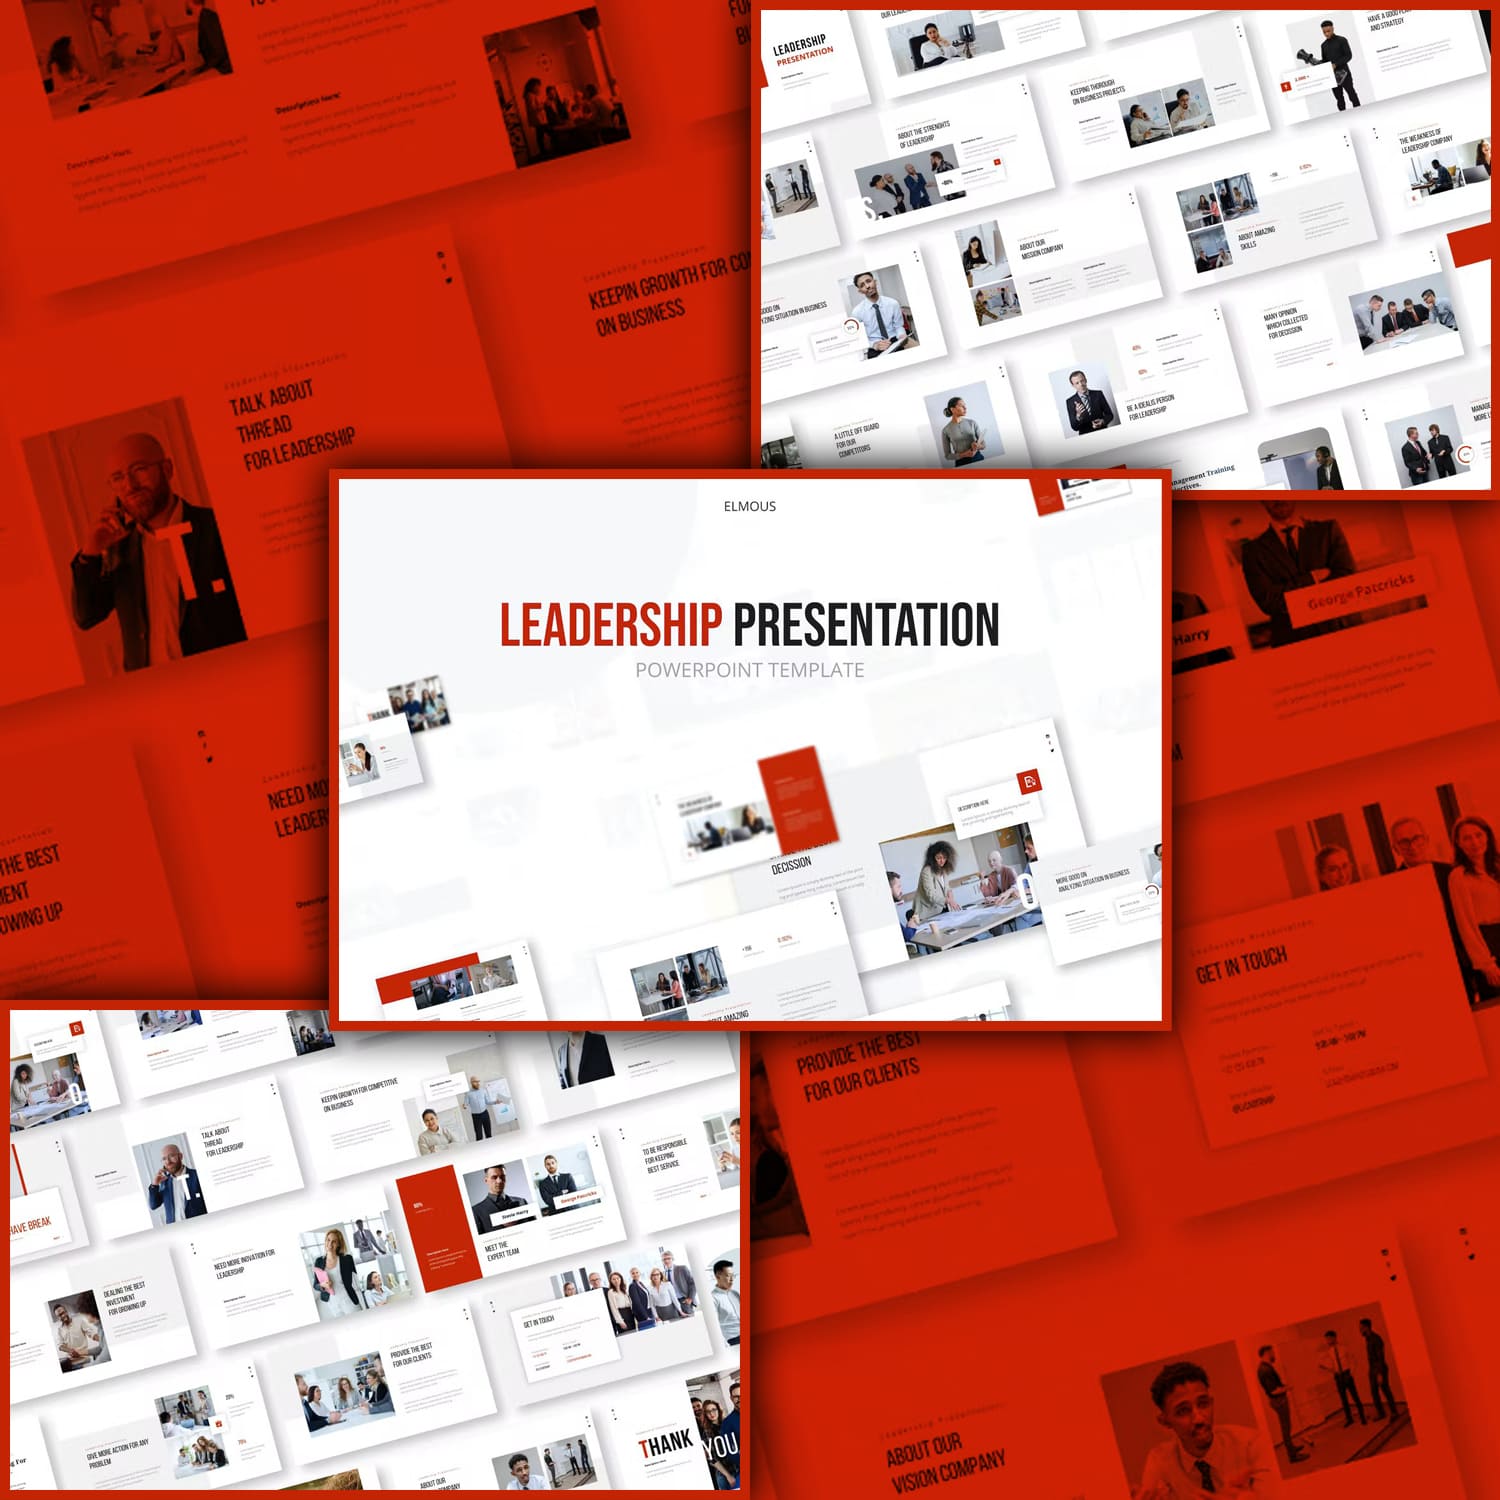 Bundle of images of charming presentation template slides on the topic of leadership.